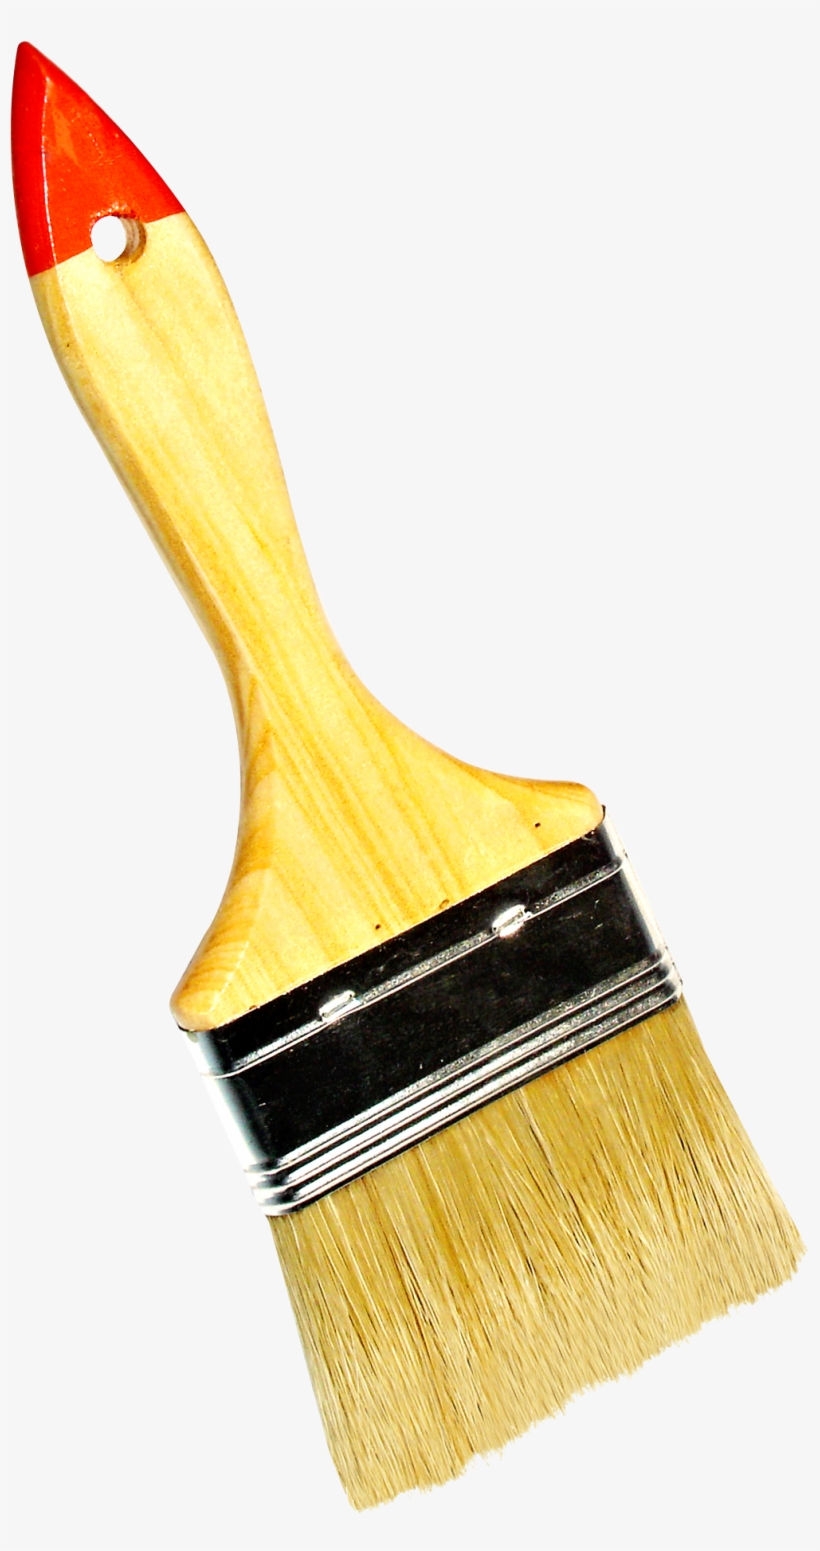 Paint Brush Png Transparent Image - Brush For Paint Png, transparent png #40820